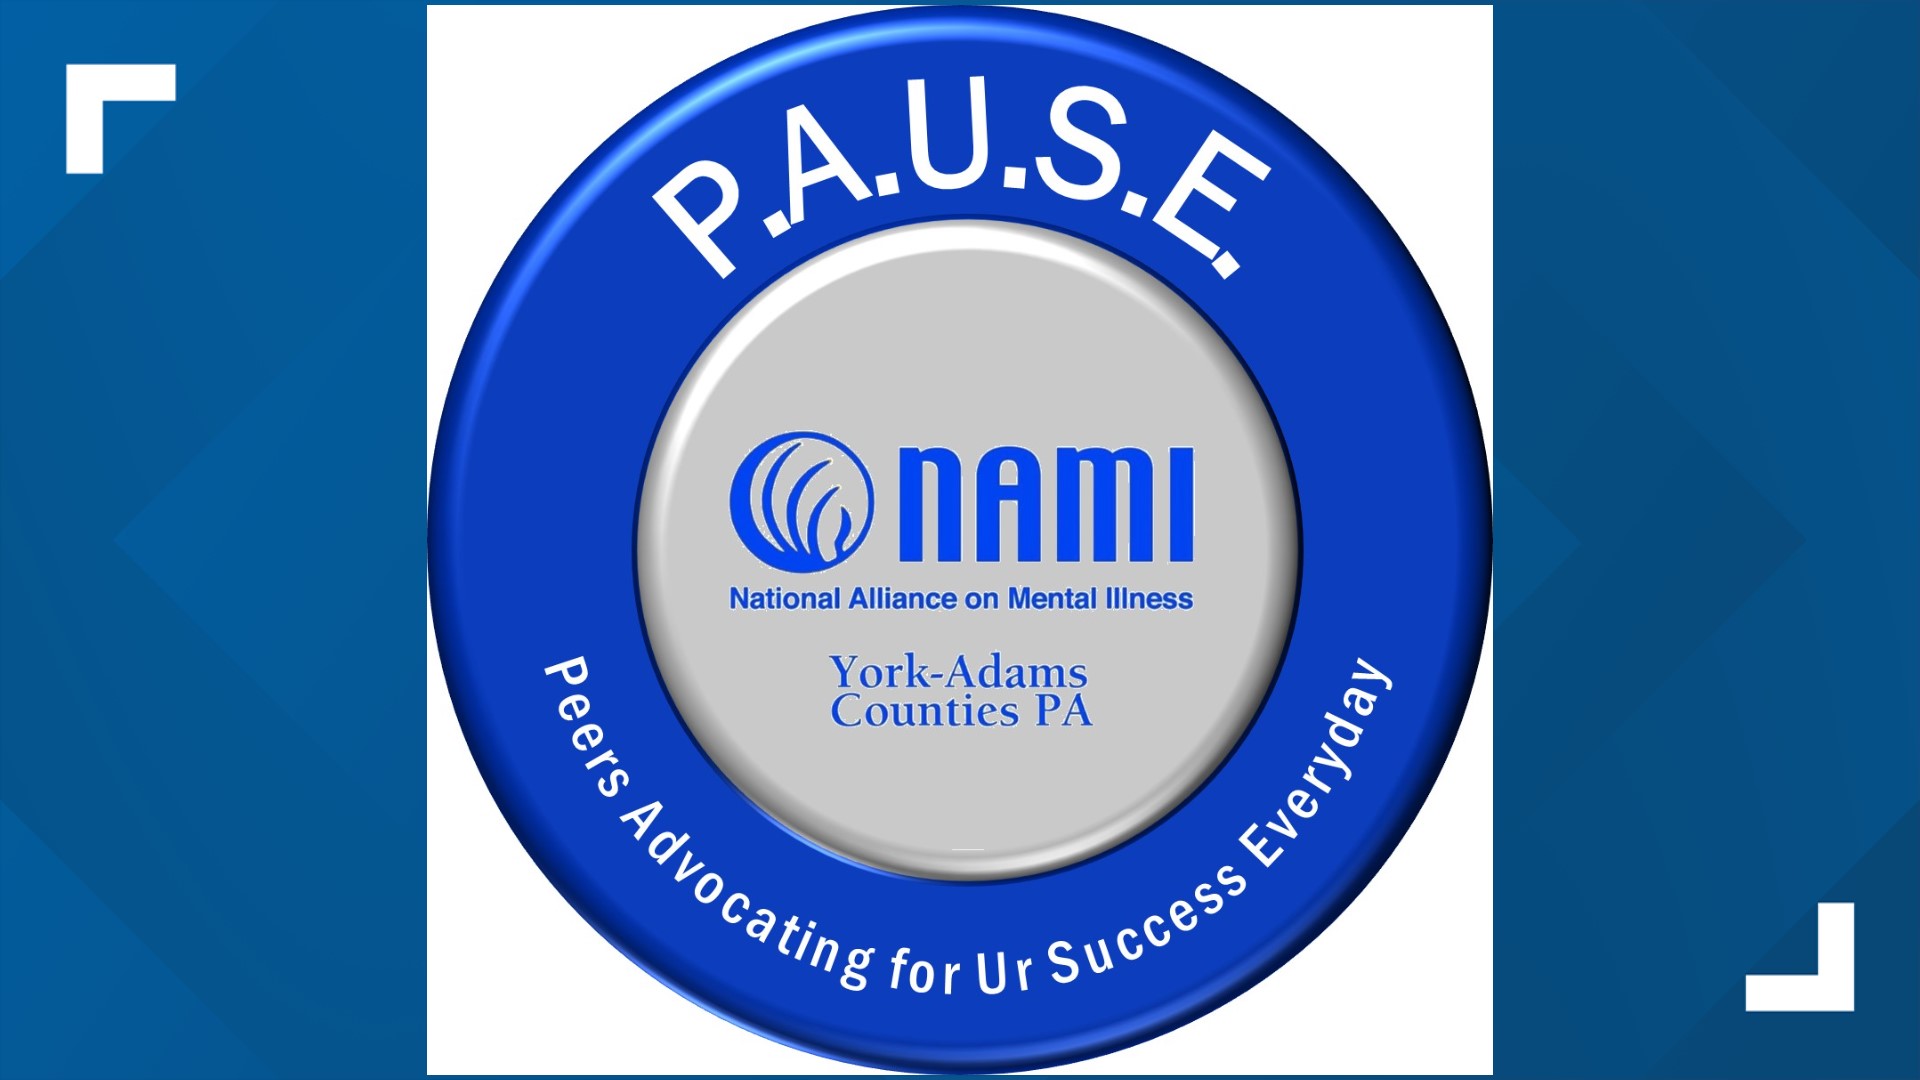 P.A.U.S.E., or "Peers Advocating for Ur Success Everyday," was created to support the mental health of students and their families in our area.